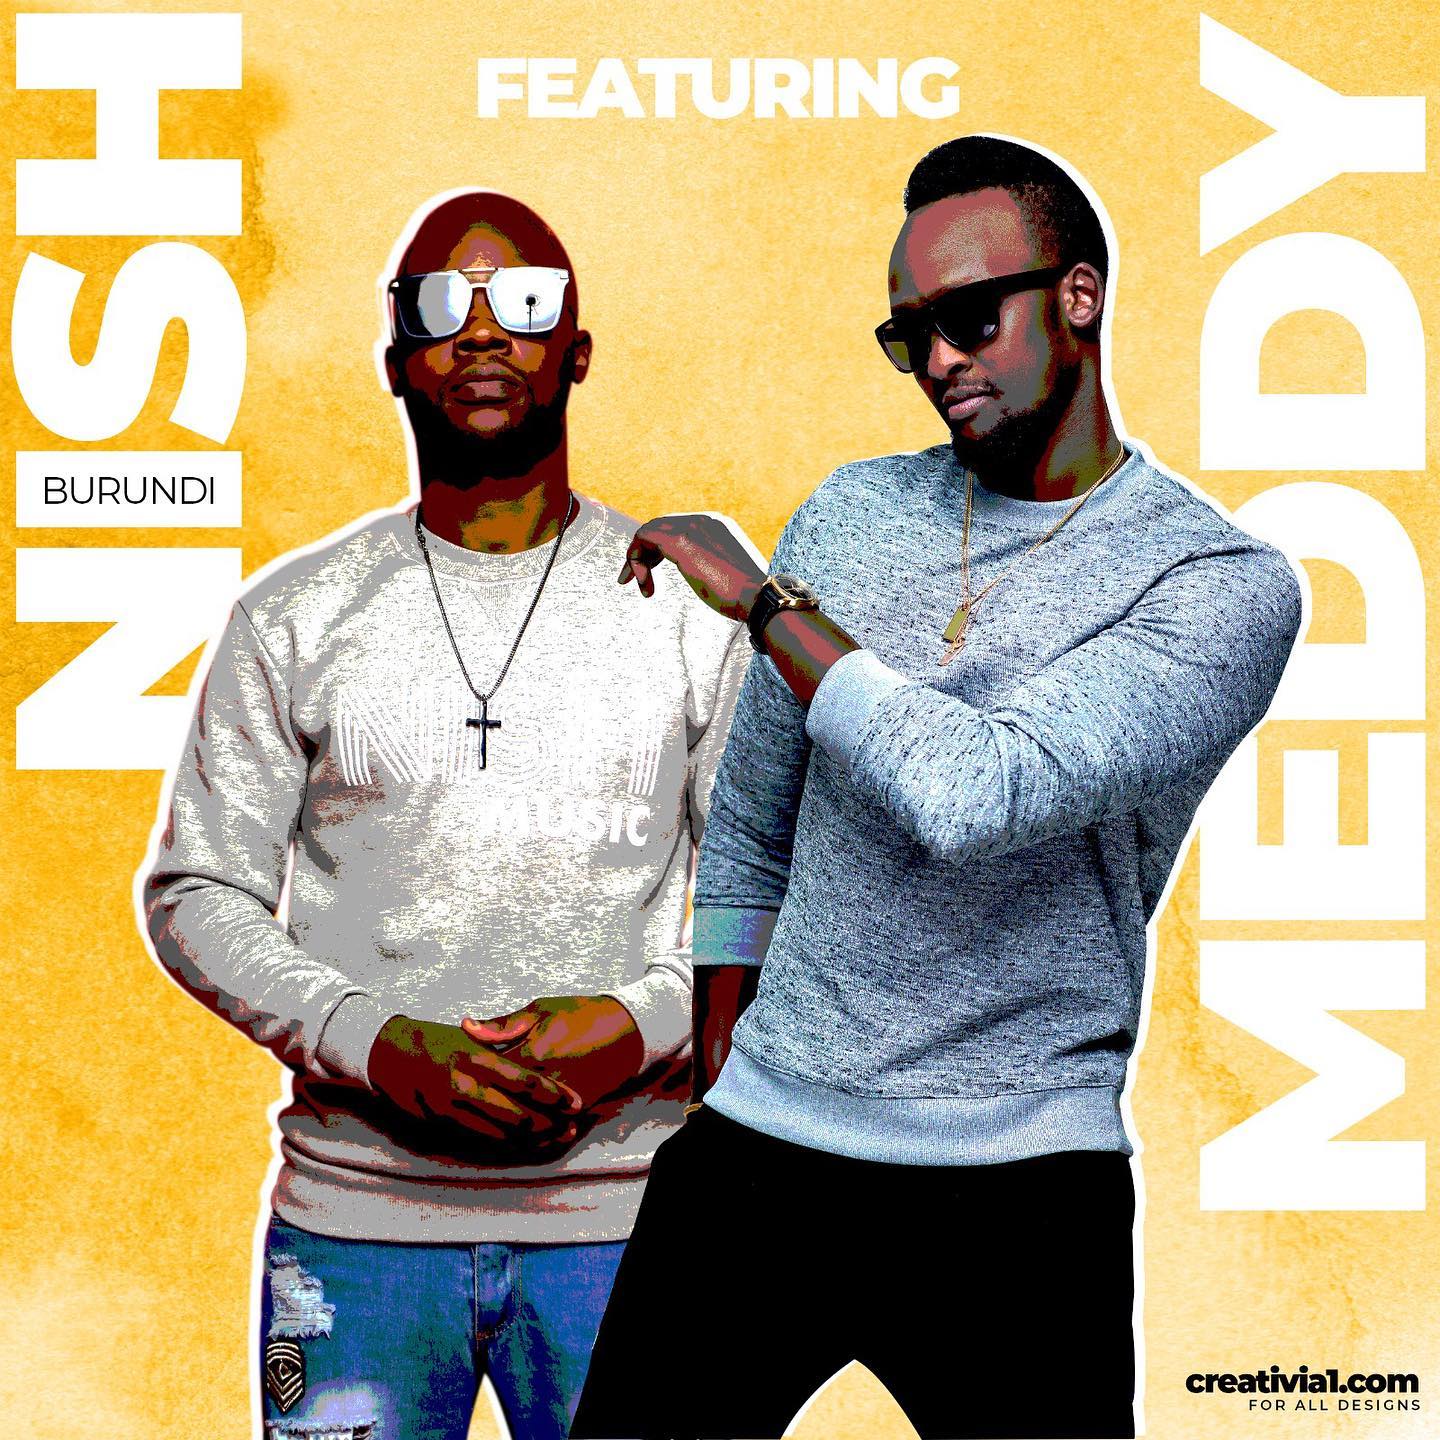 Audio + Video: Meddy ft. Nish – Downtown